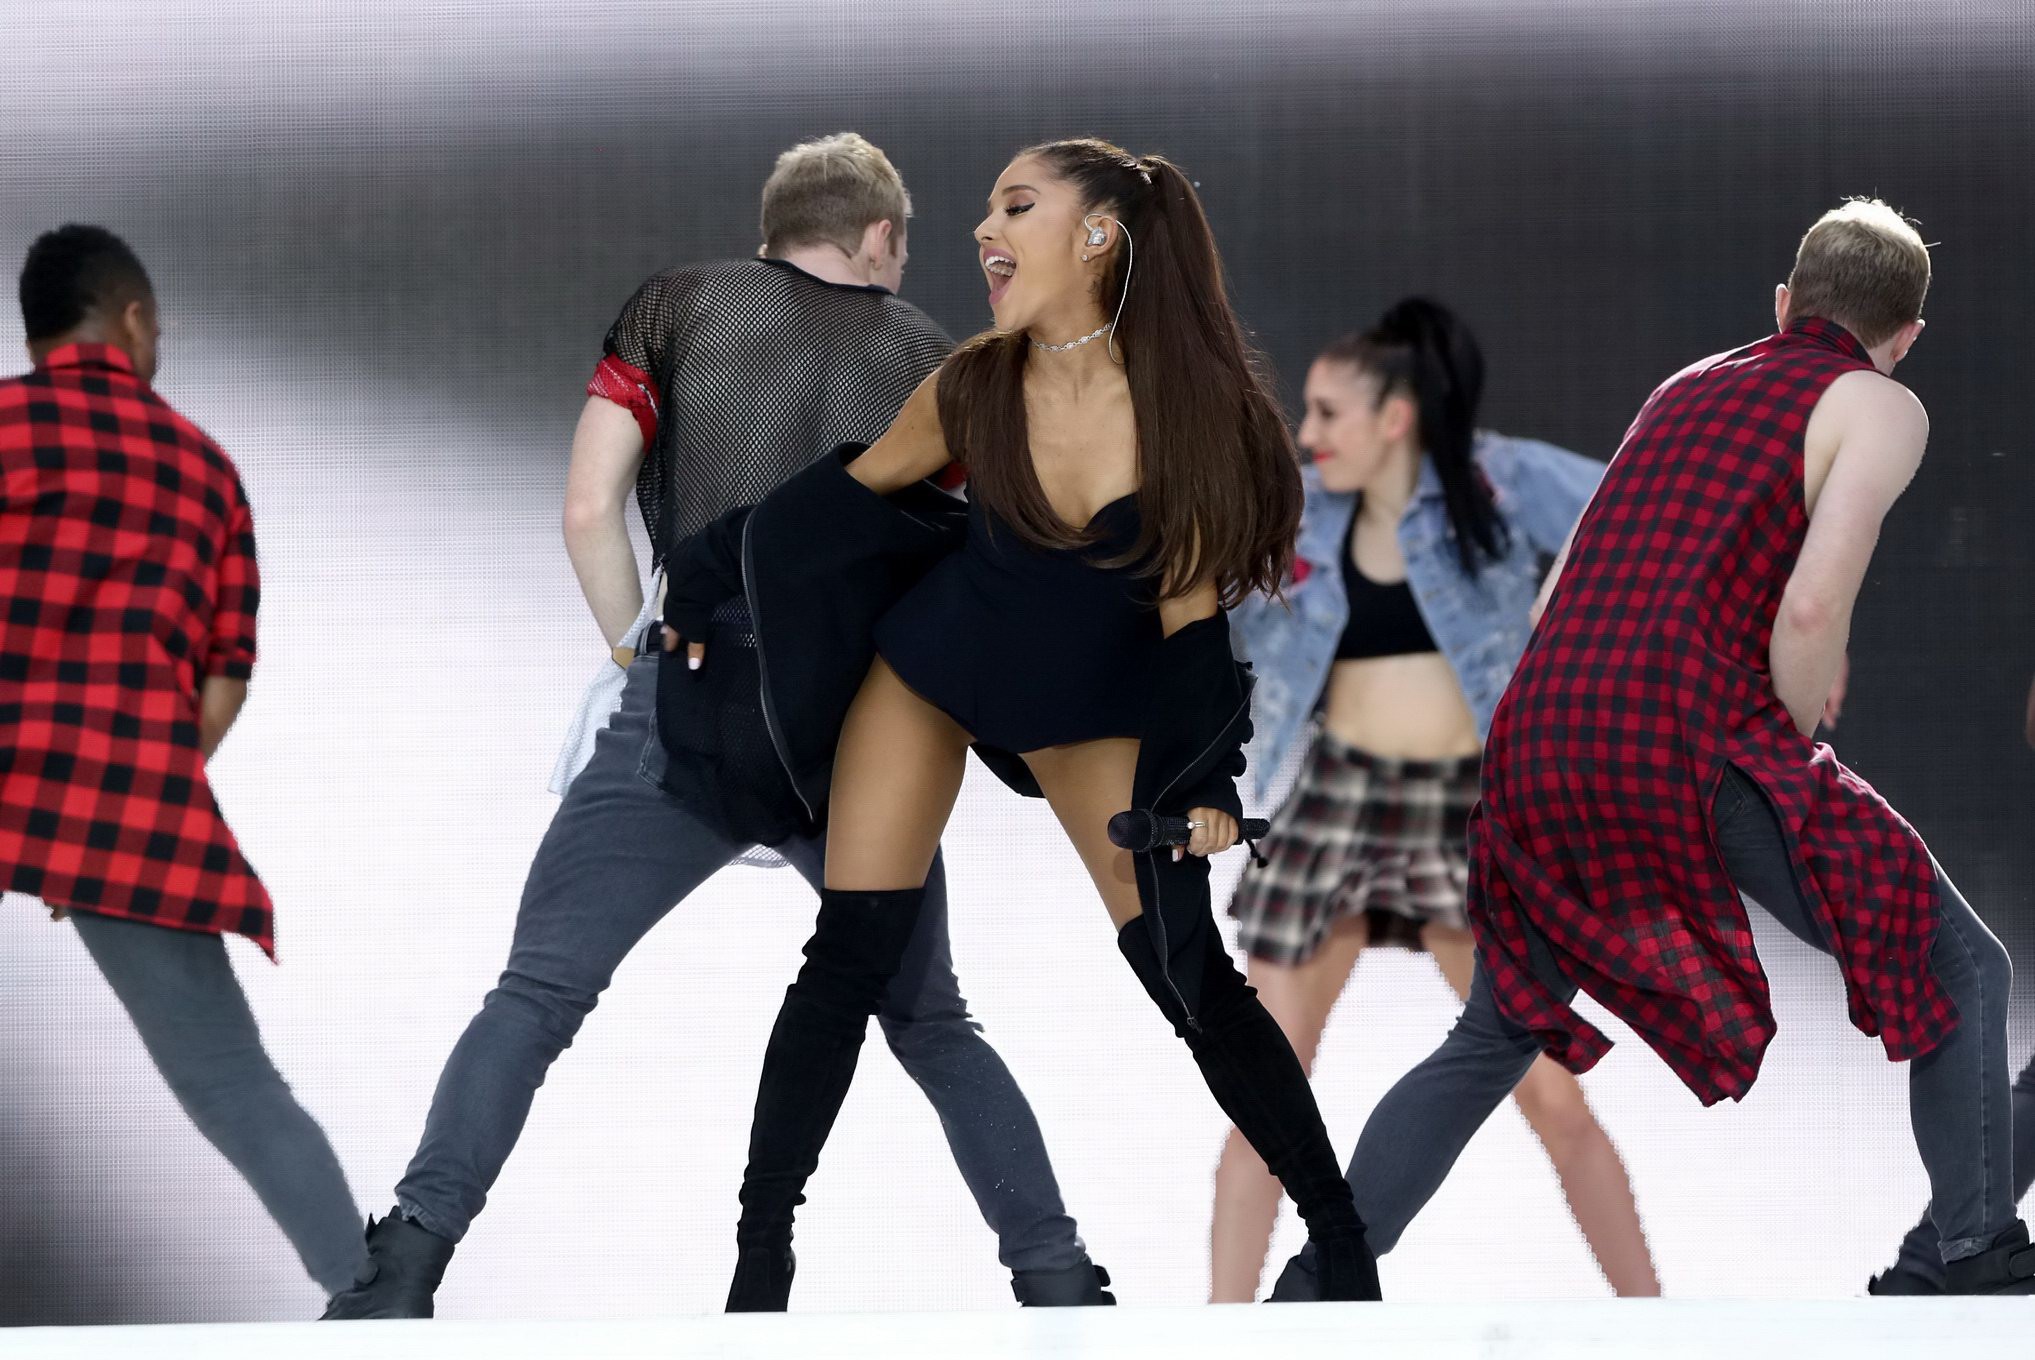 Ariana Grande shows off her shaved pussy in a tiny black outfit while performing #75161952